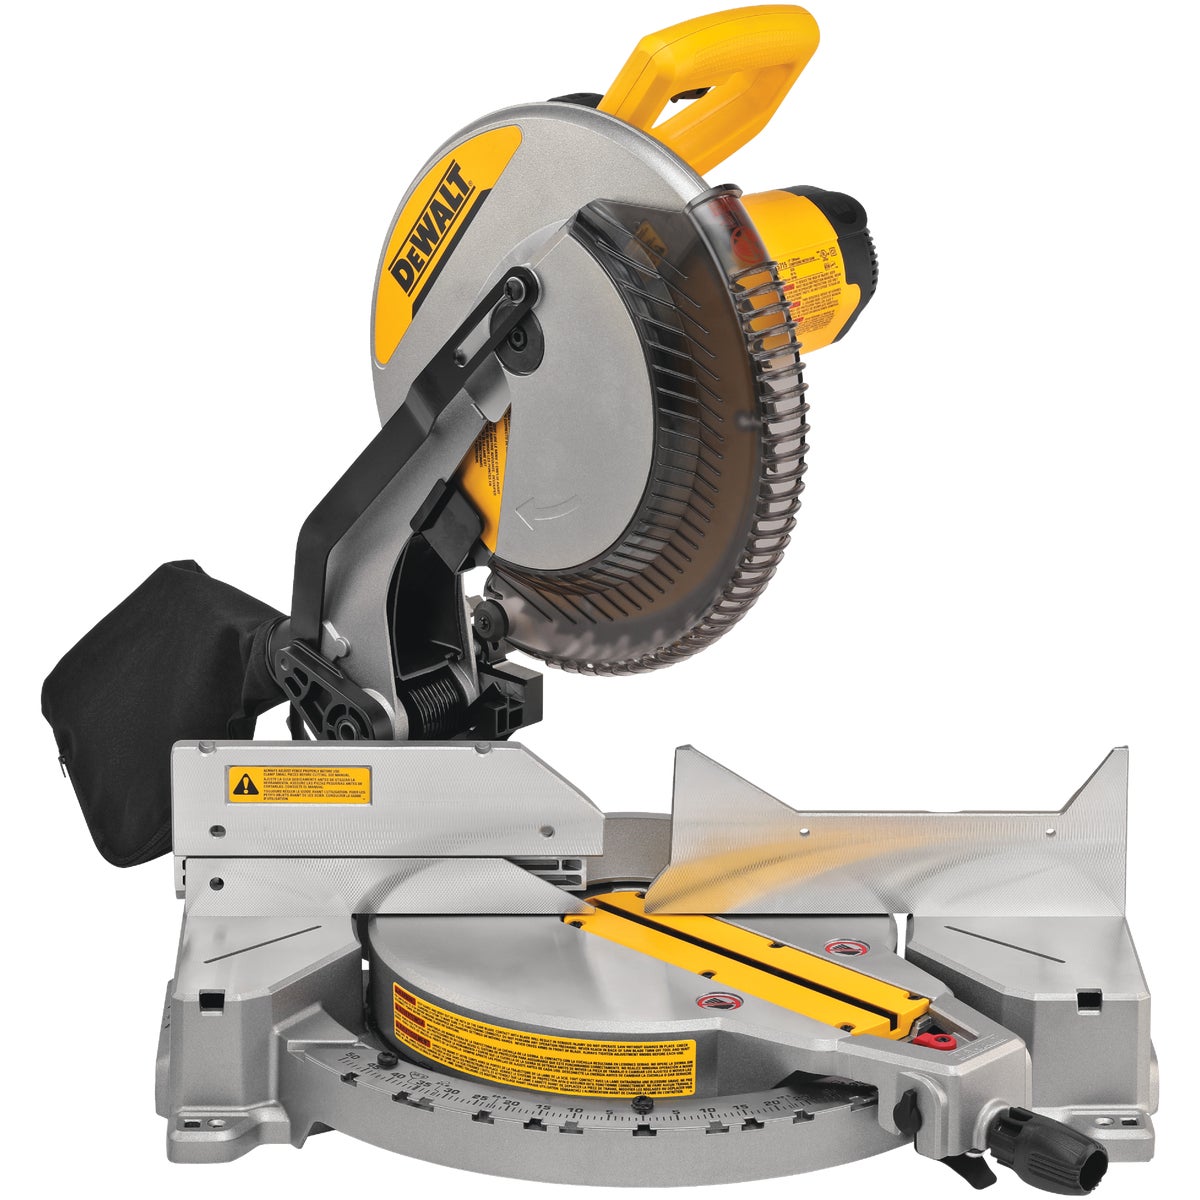 Genesis 10 In. 15-Amp Compound Miter Saw with Laser Guide - Crafty